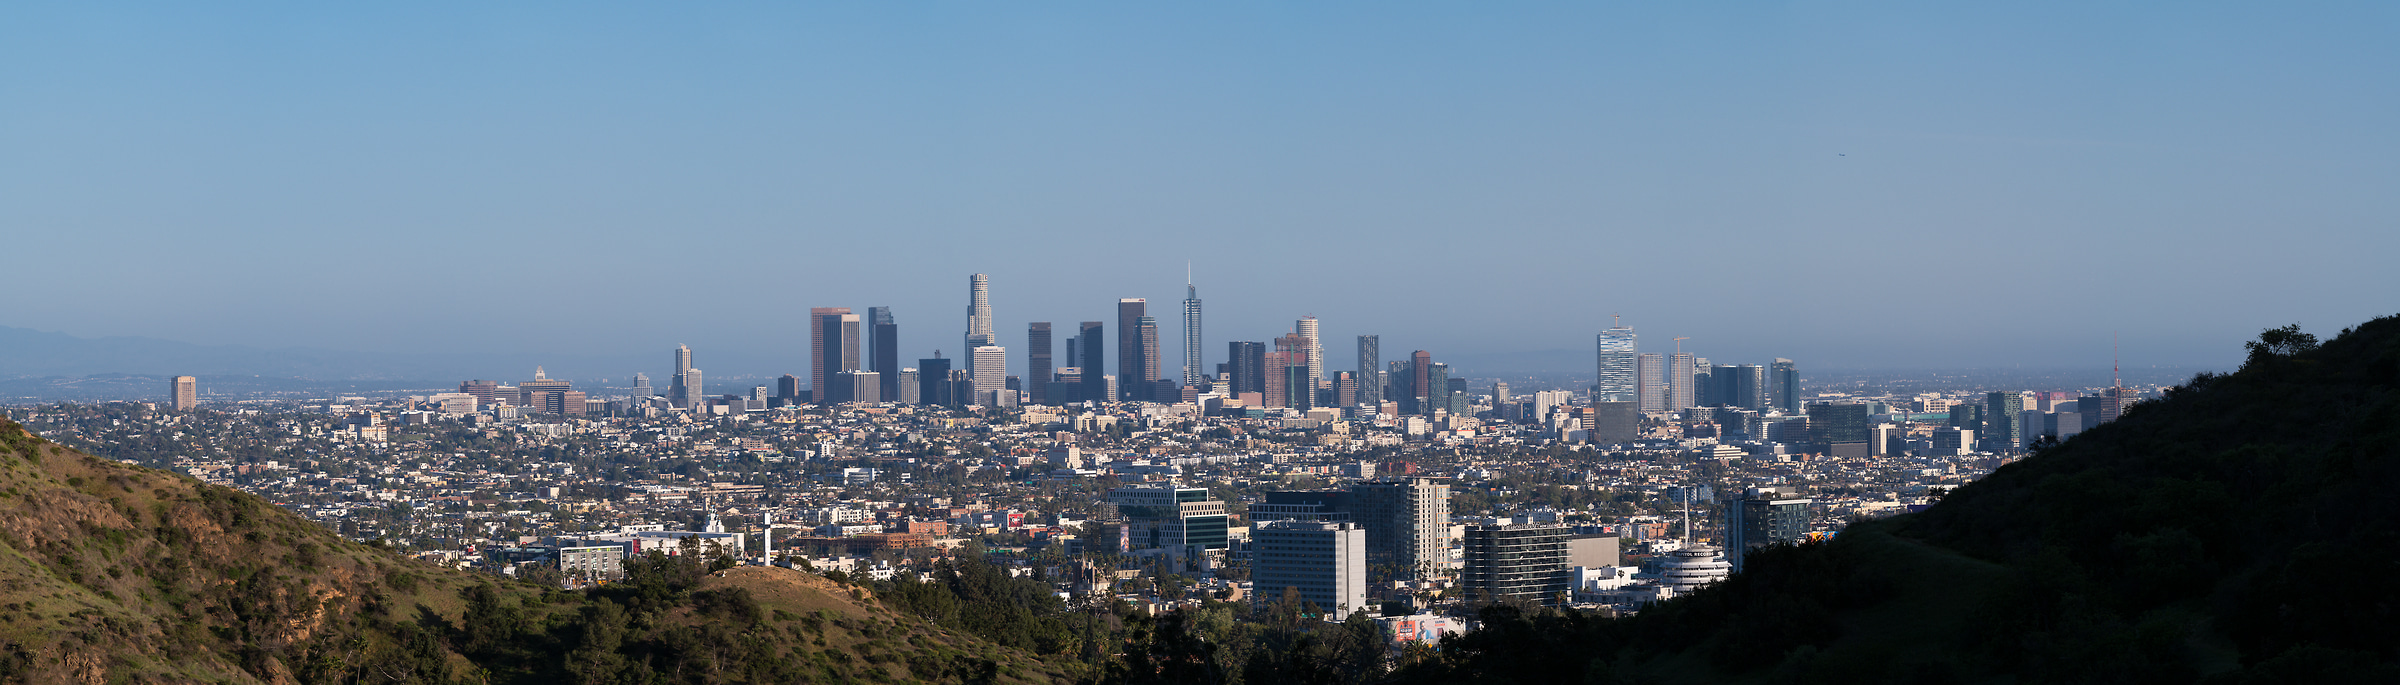 389 megapixels! A very high resolution, large-format panorama wallpaper photo of the Los Angeles skyline; photograph created by Greg Probst in Hollywood Hills, Los Angeles, California.